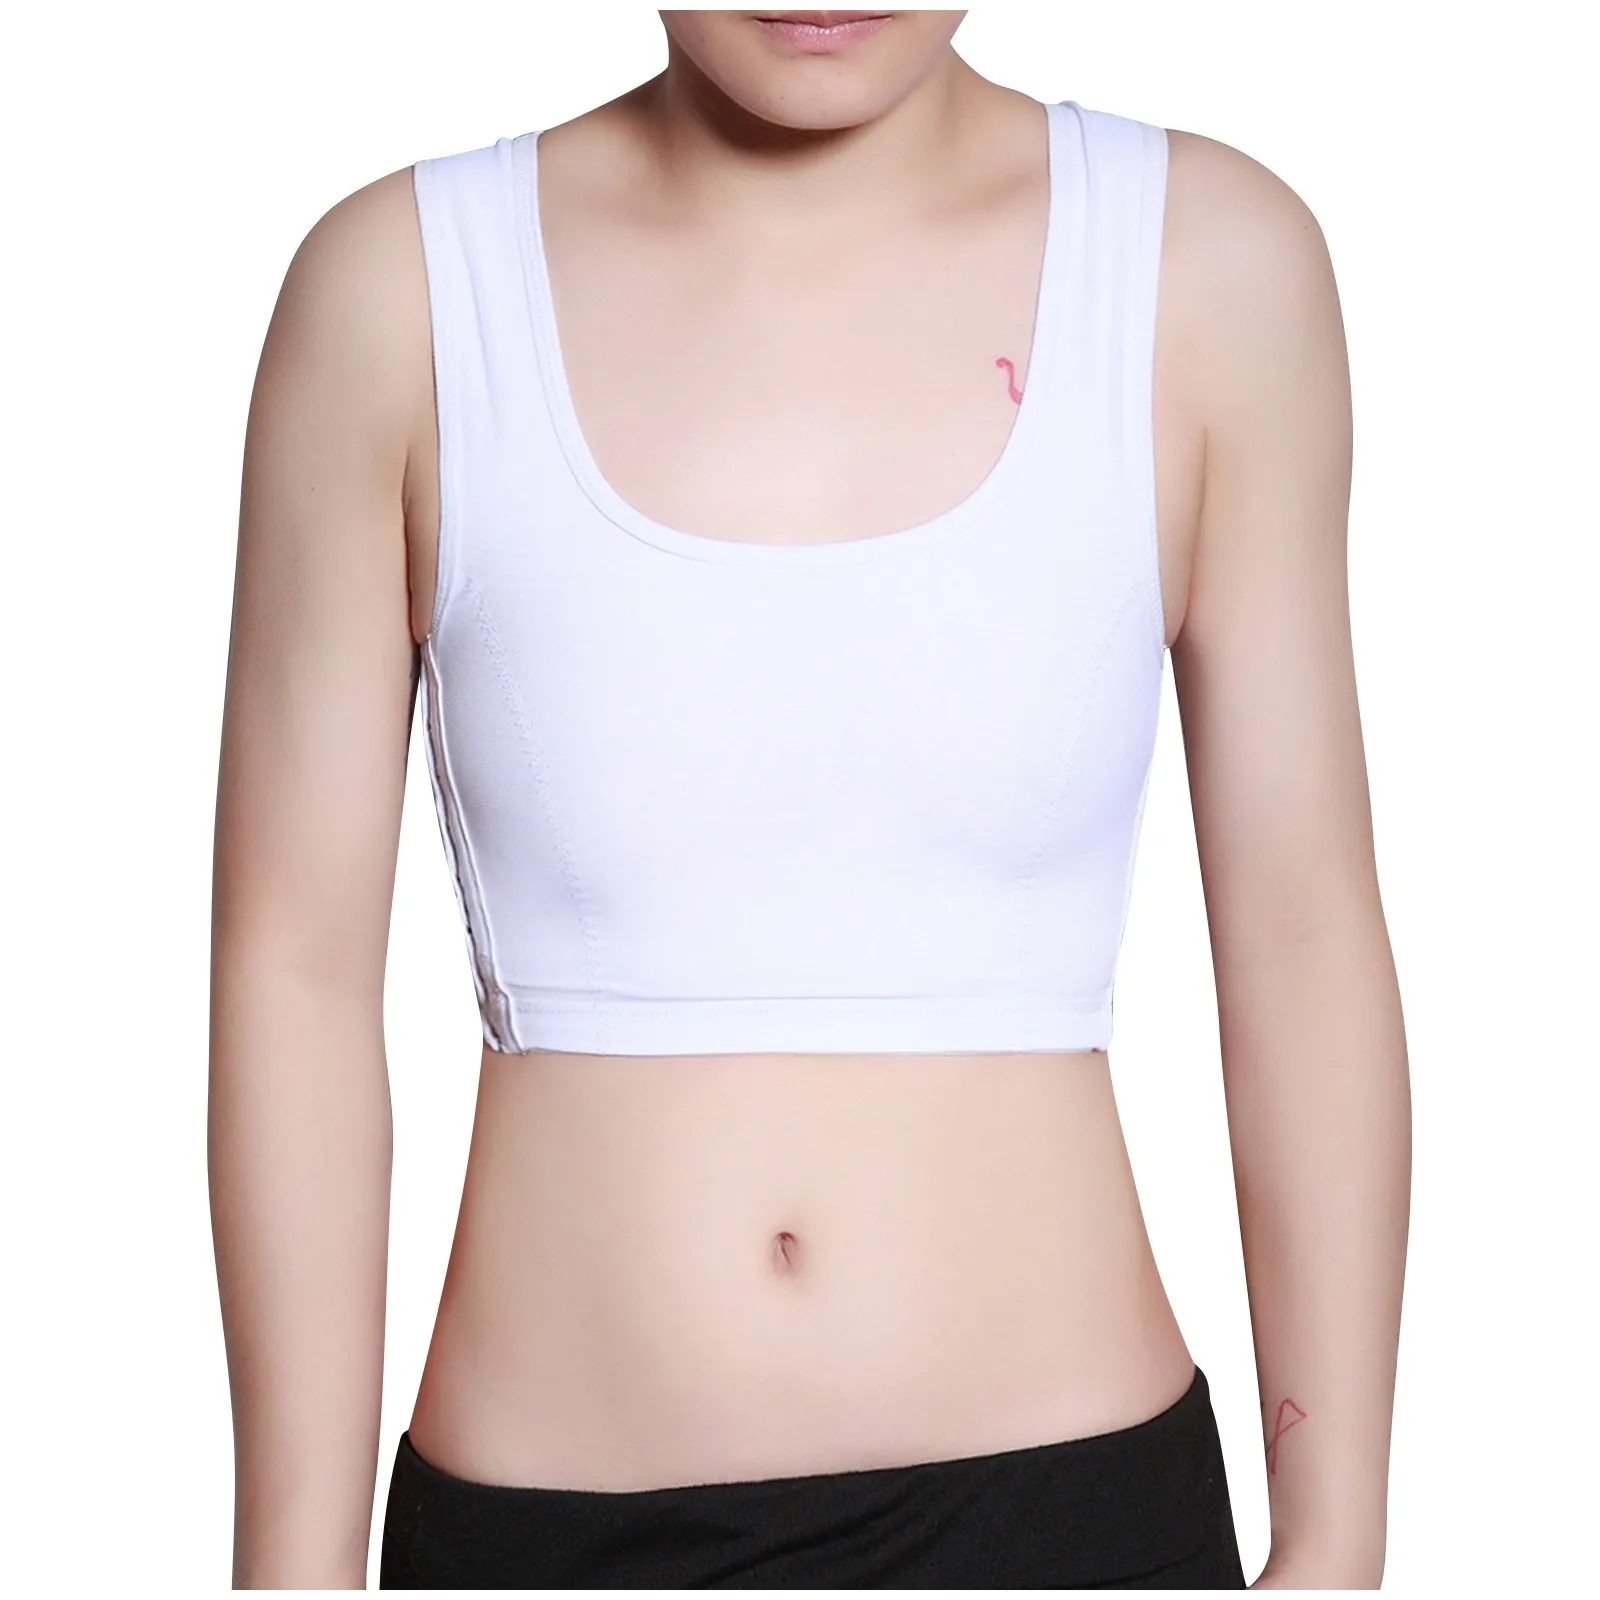 Women Solid Color Breast Side Buckle Short Chest Casual Tran Top Breathable Buckle Tops Casual Vest Breast Binder Tops Shapers plus size shapewear